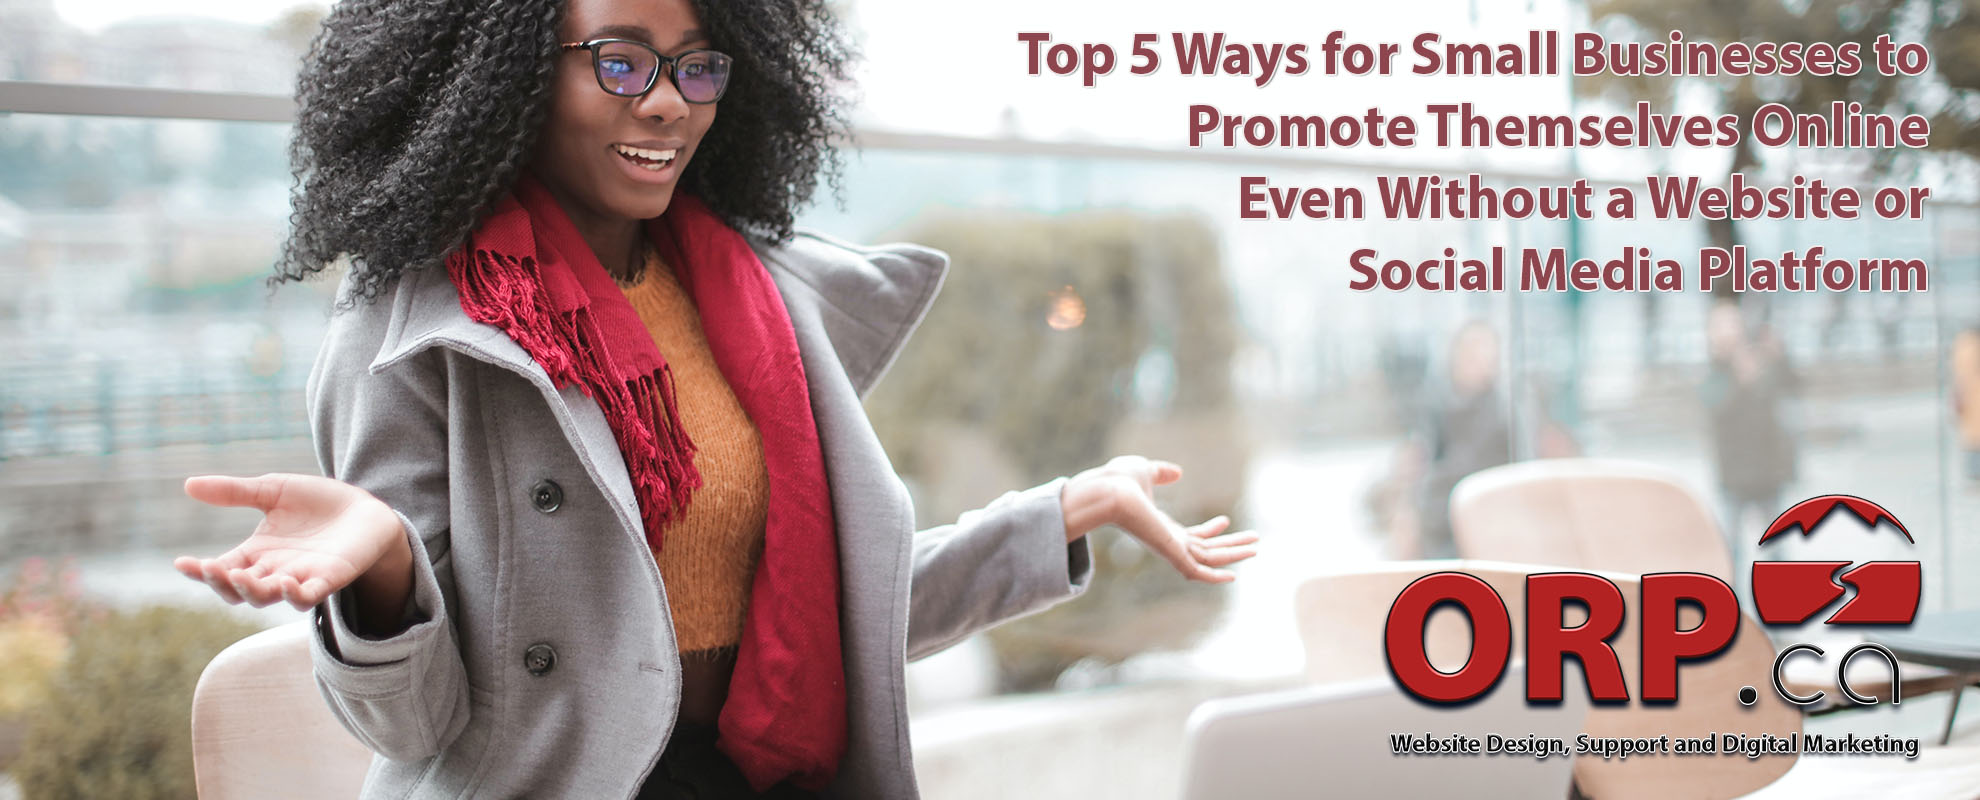 Article Image fro Top 5 Ways for Small Businesses to Promote Themselves Online Even Without a Website or Social Media Platform by ORP.ca Small Business Website Design, Support and Digital Marketing, Sudbury and northern Ontario, Canada